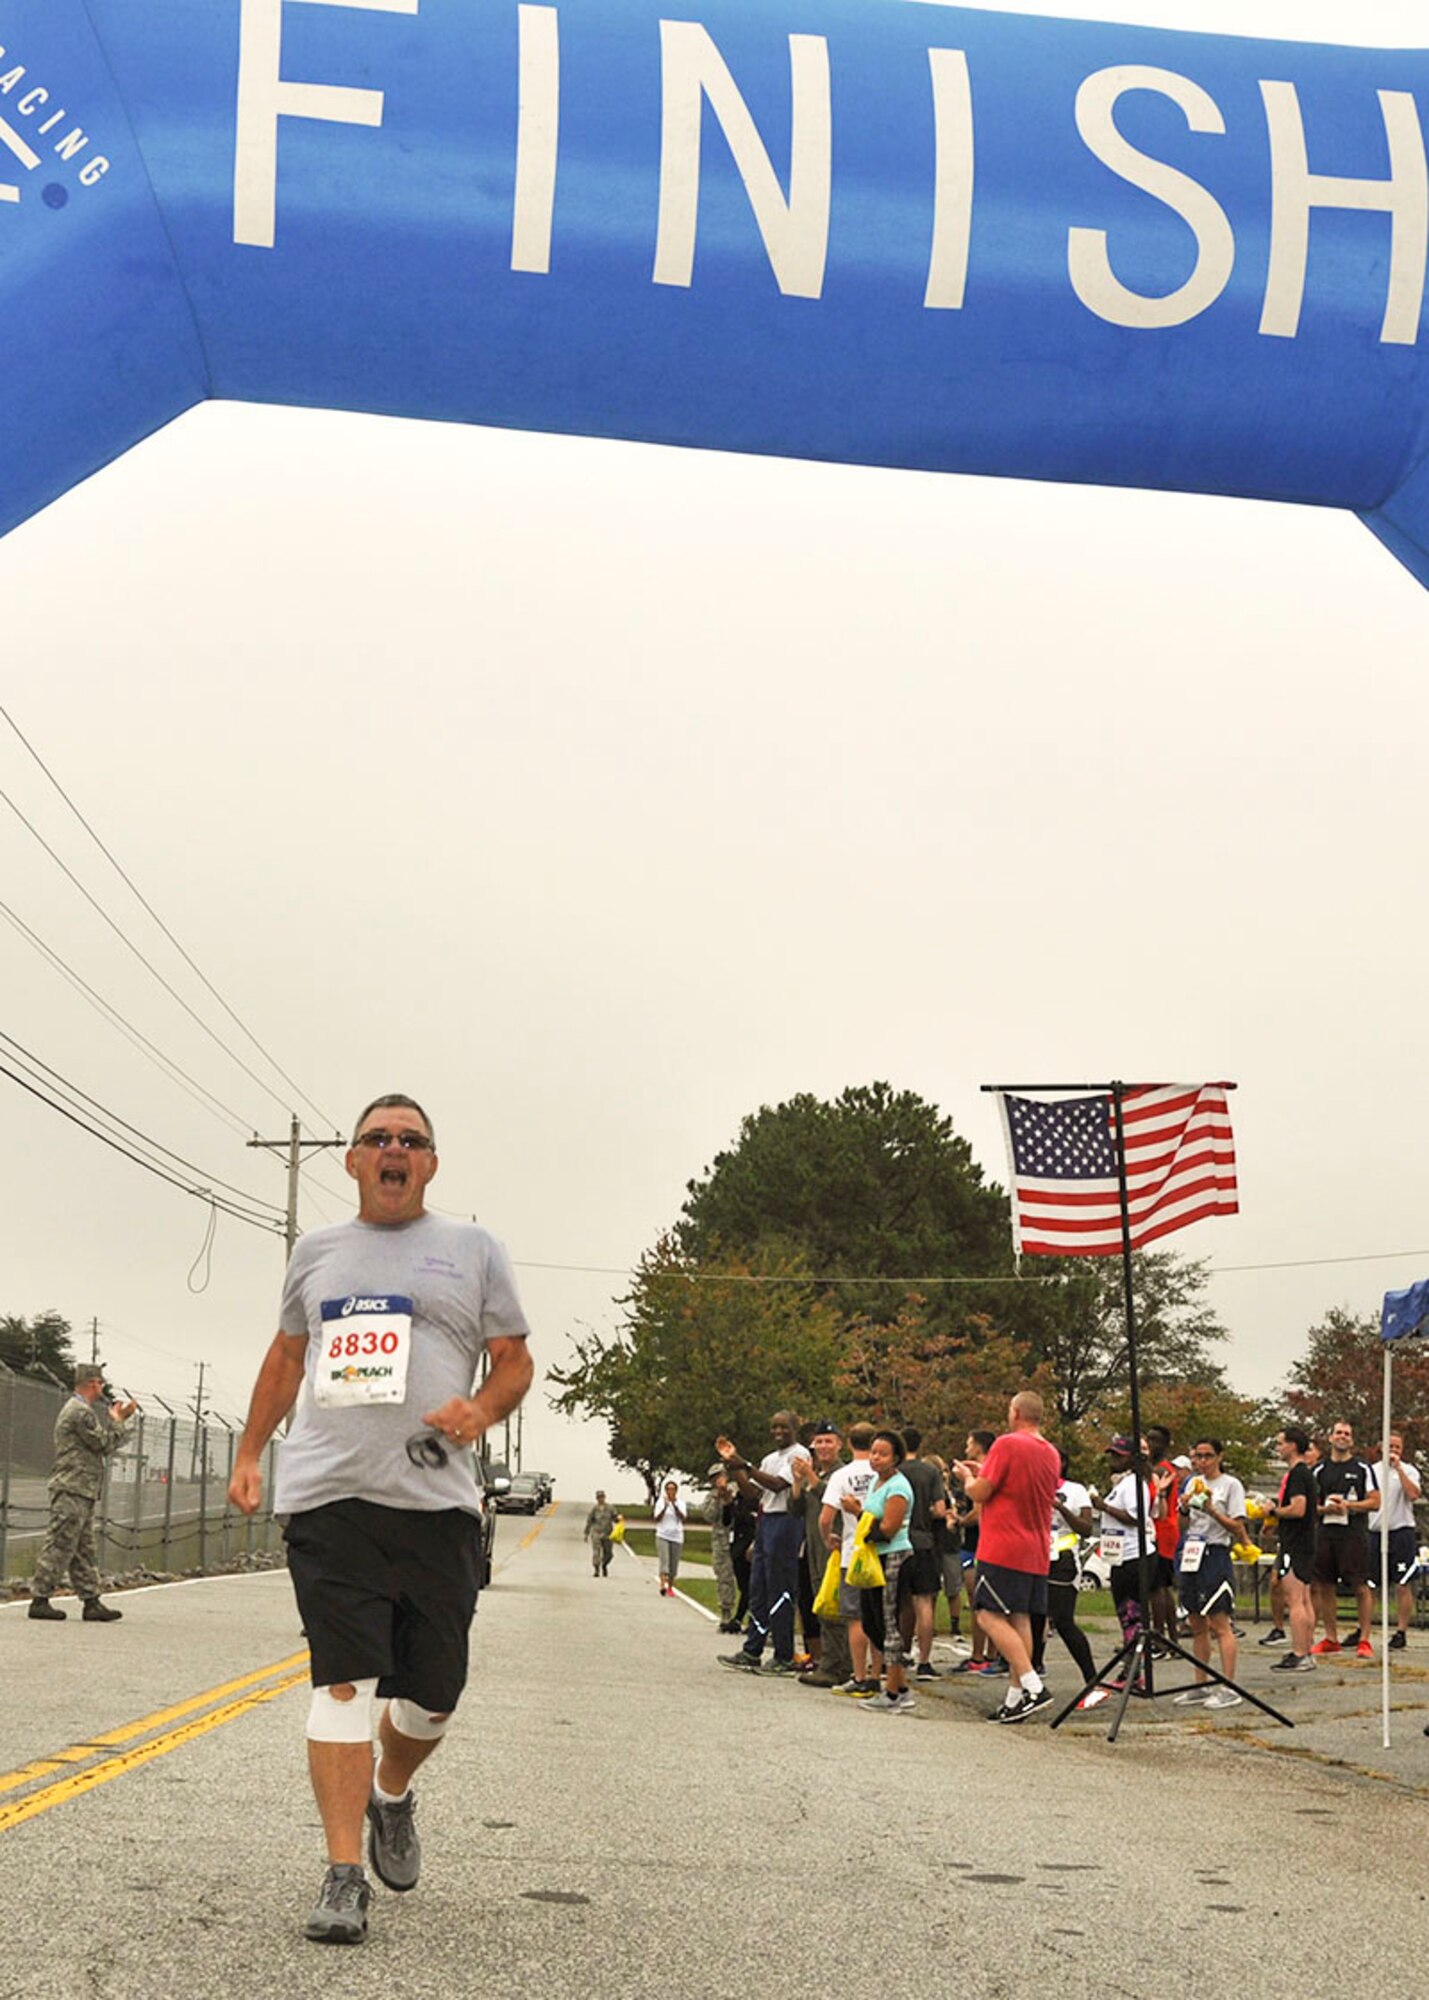 Master Sgt. (Ret.) Samuel Farmer of the 94th Civil Engineering Squadron, crosses the finish line of the 2017 Falcon 5K Run Oct. 15, 2017. After recently rocovering from open-heart surgery, Farmer wanted to complete the run, and support Airmen in need. (U.S. Air Force photo/Master Sgt. James Branch)